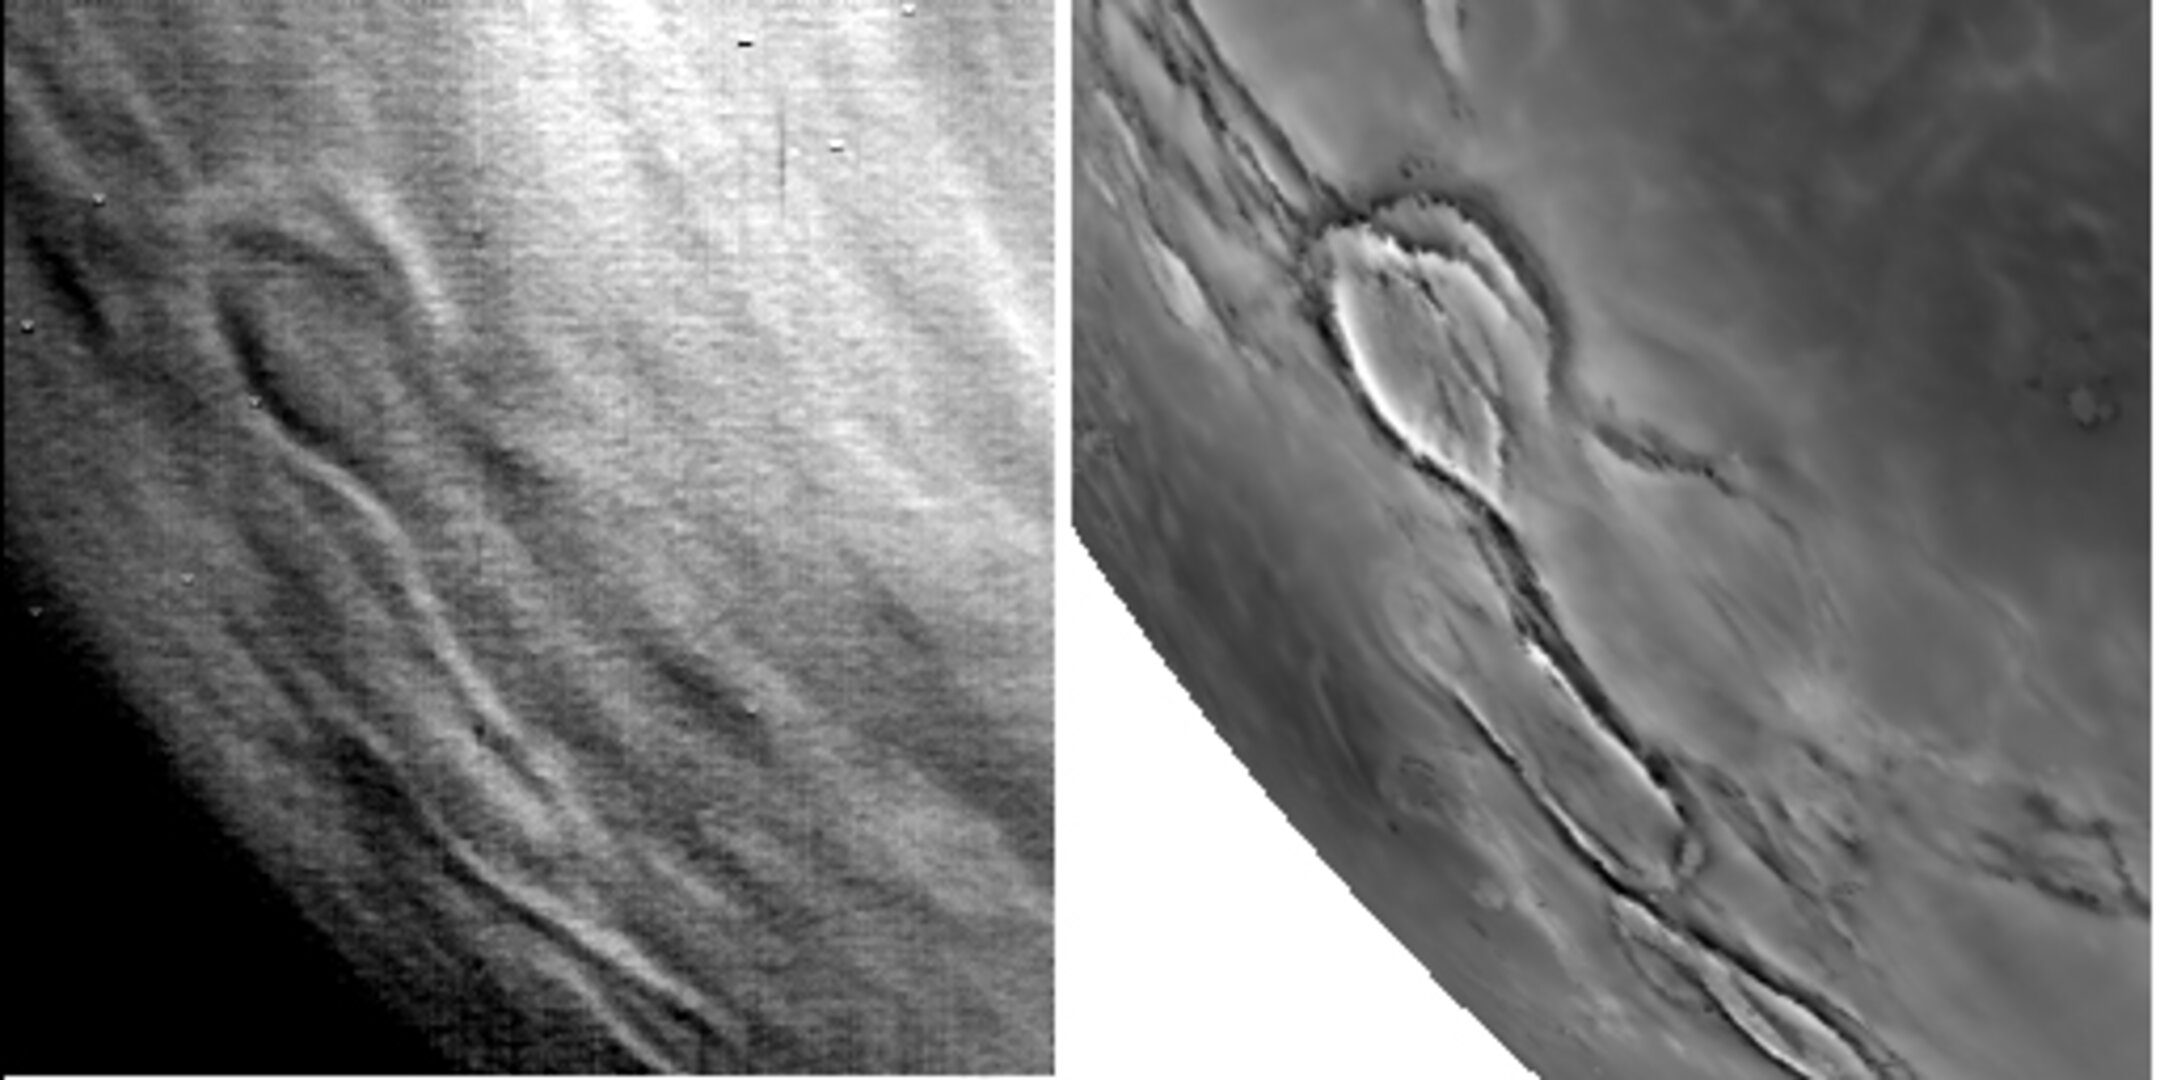 Thermal and radar maps of Venus’ surface compared